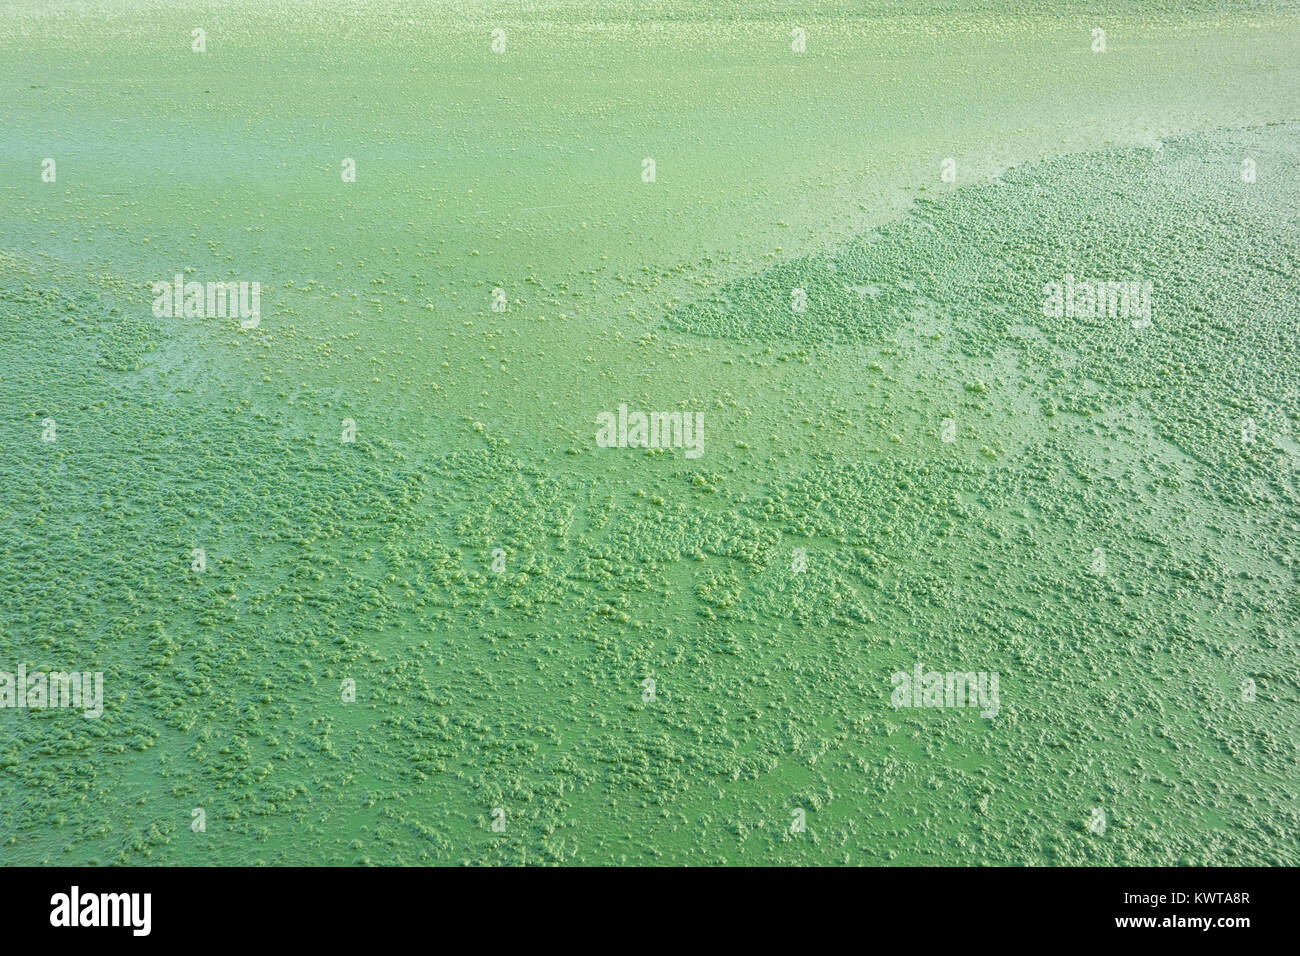 Algal bloom in a eutrophic lake. A thick green scum of algae covers some parts of Lonar Lake. (Maharashtra, India). Stock Photo